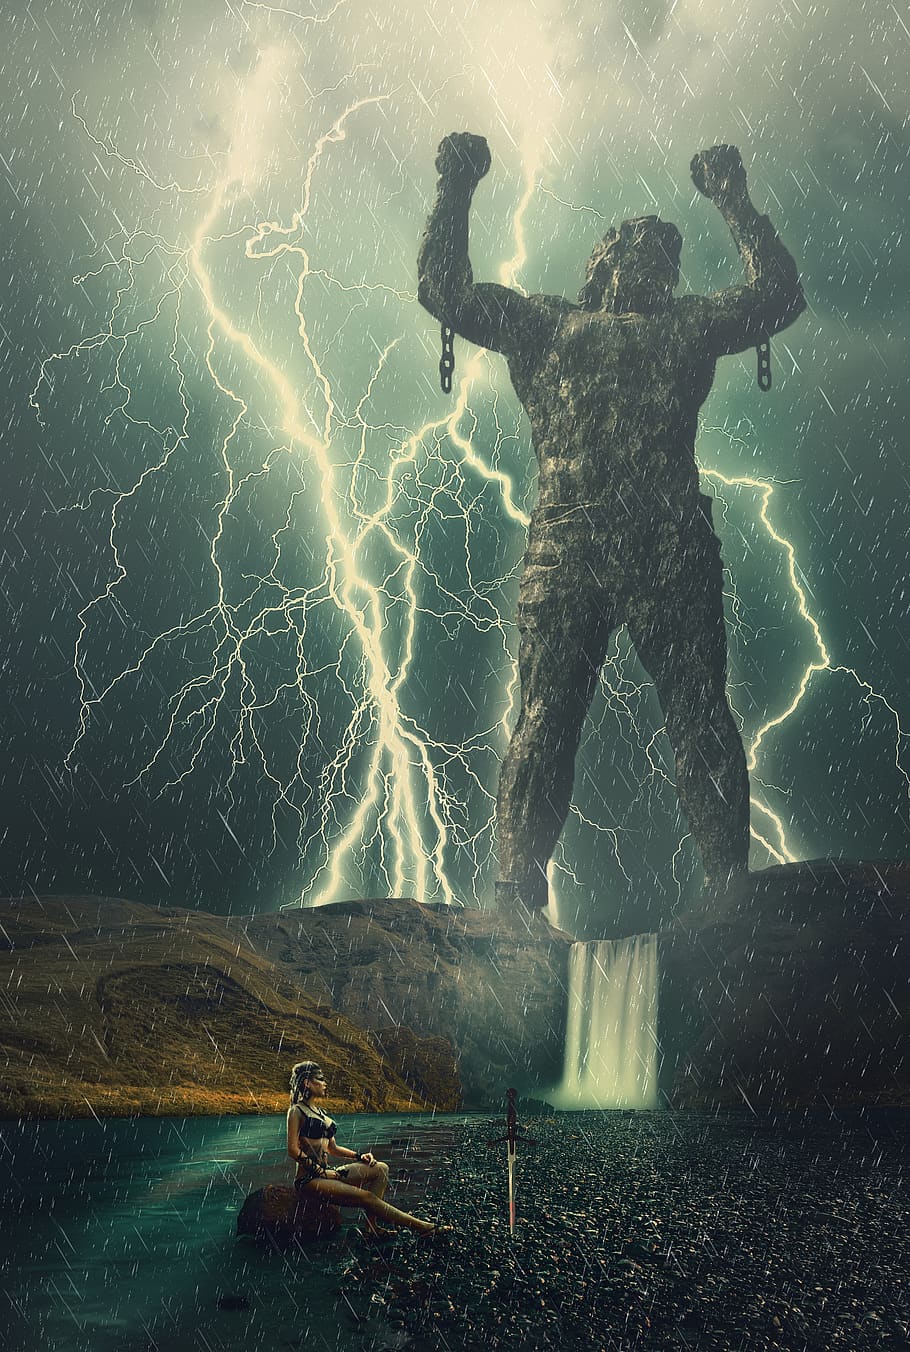 surreal, fantasy, girl, warrior, waterfall, landscape, statue, lightning, one person, nature